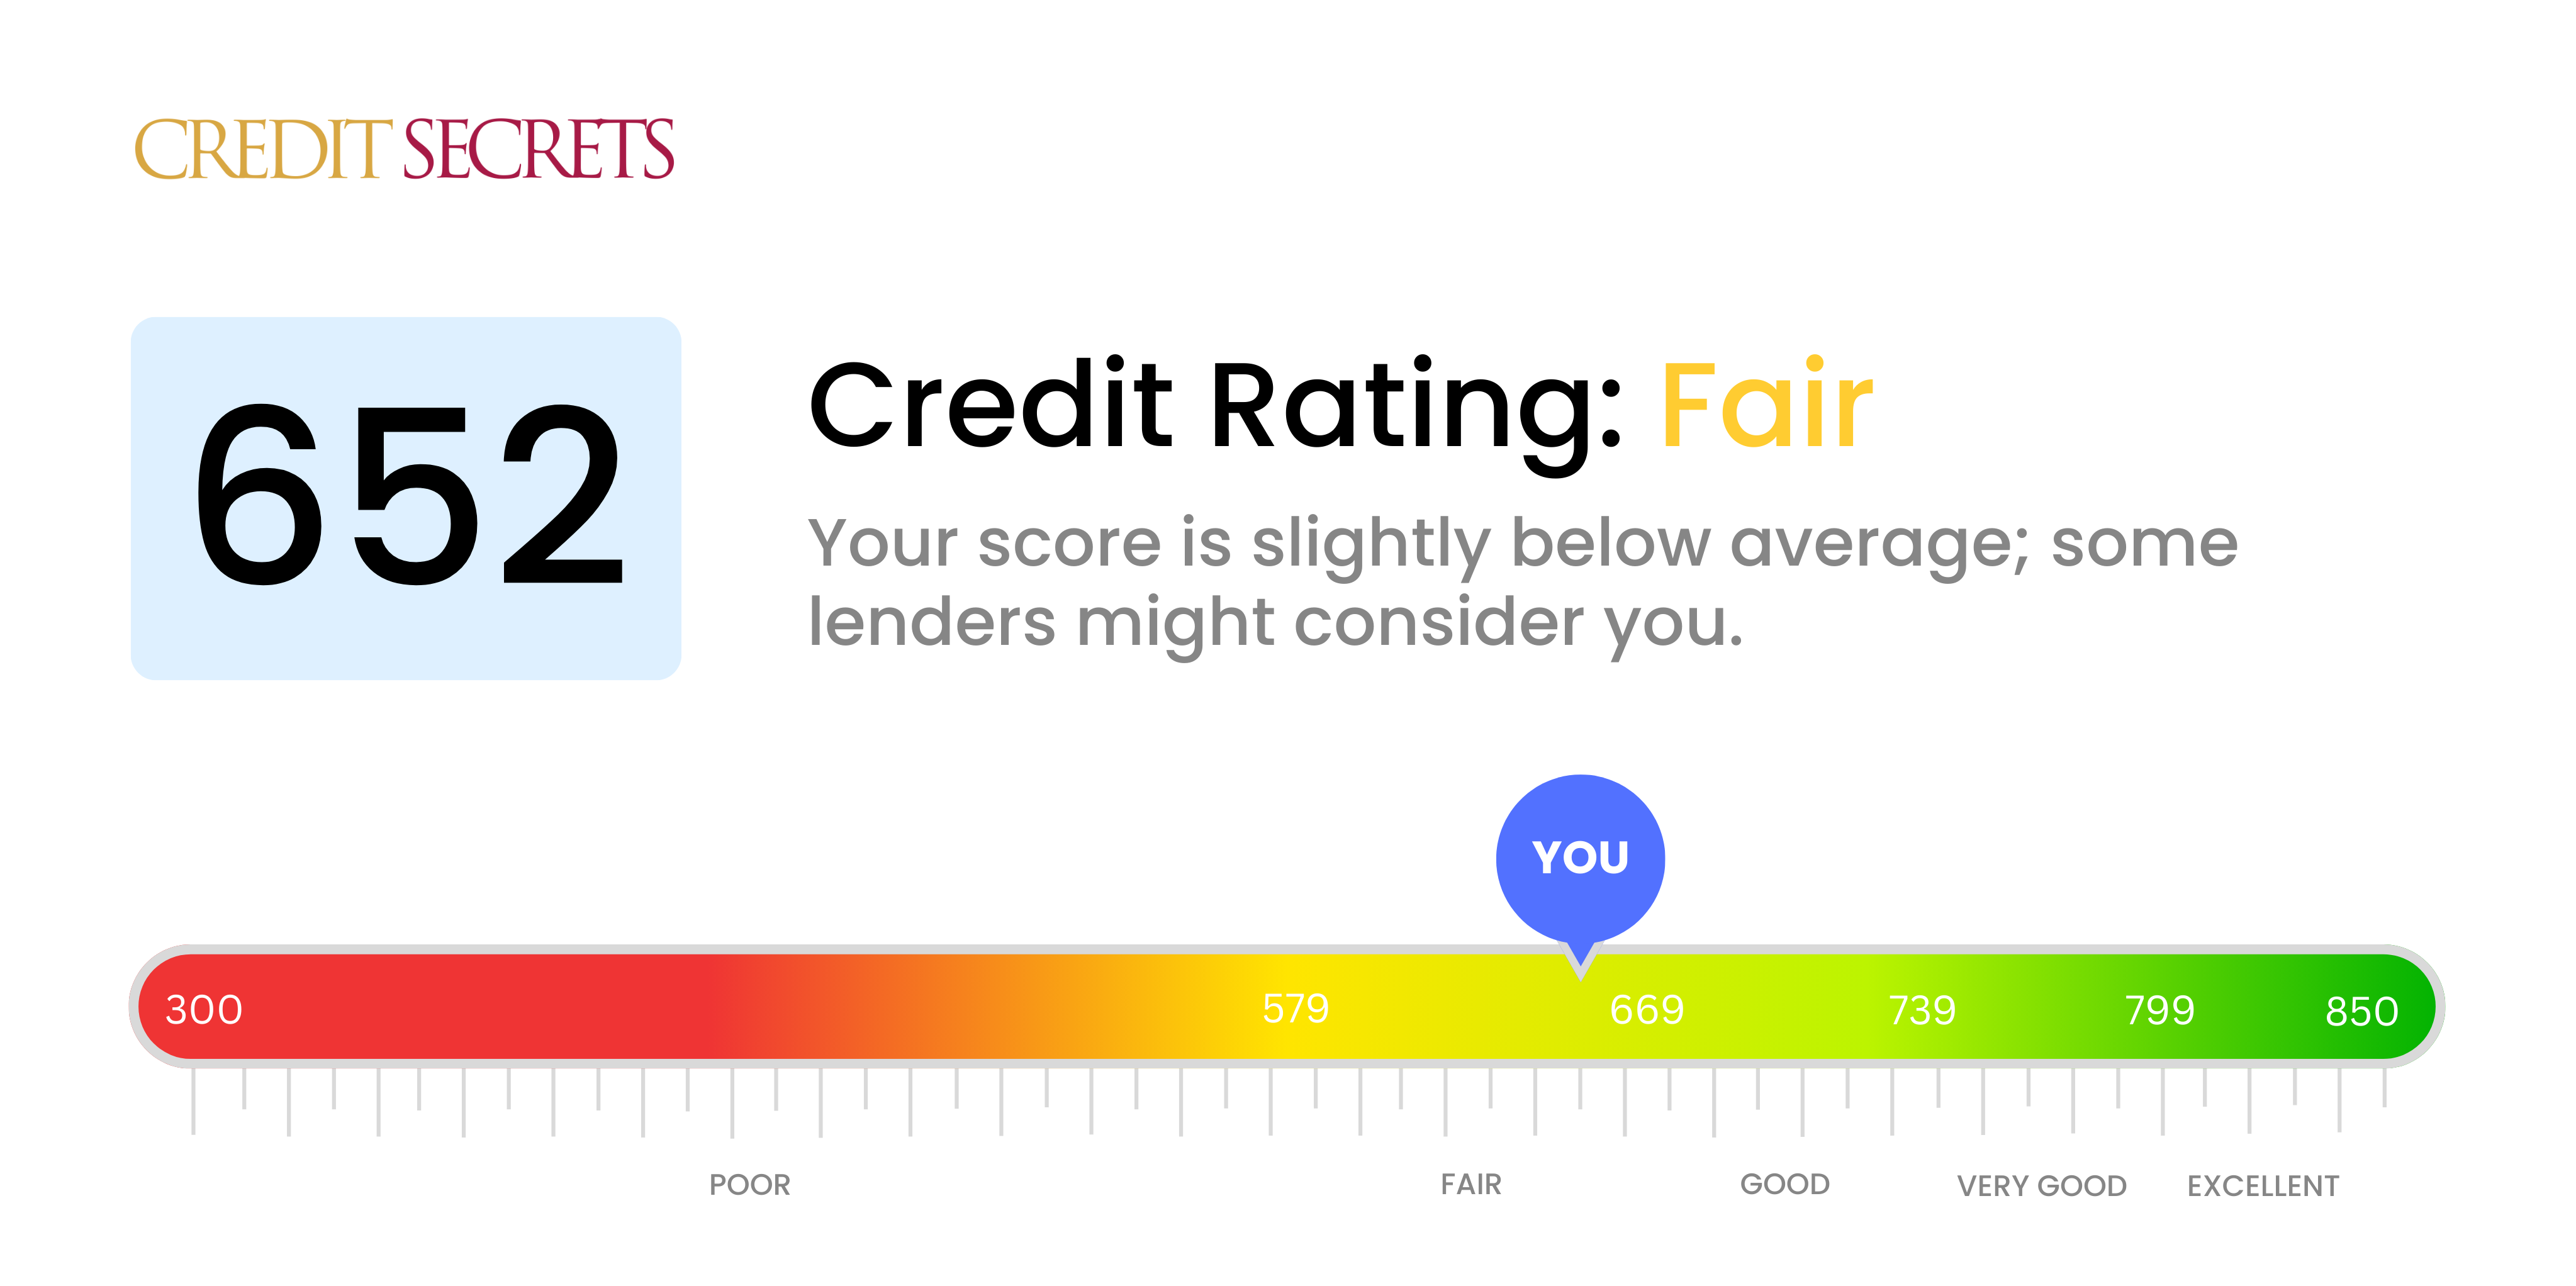 Is 652 a good credit score?